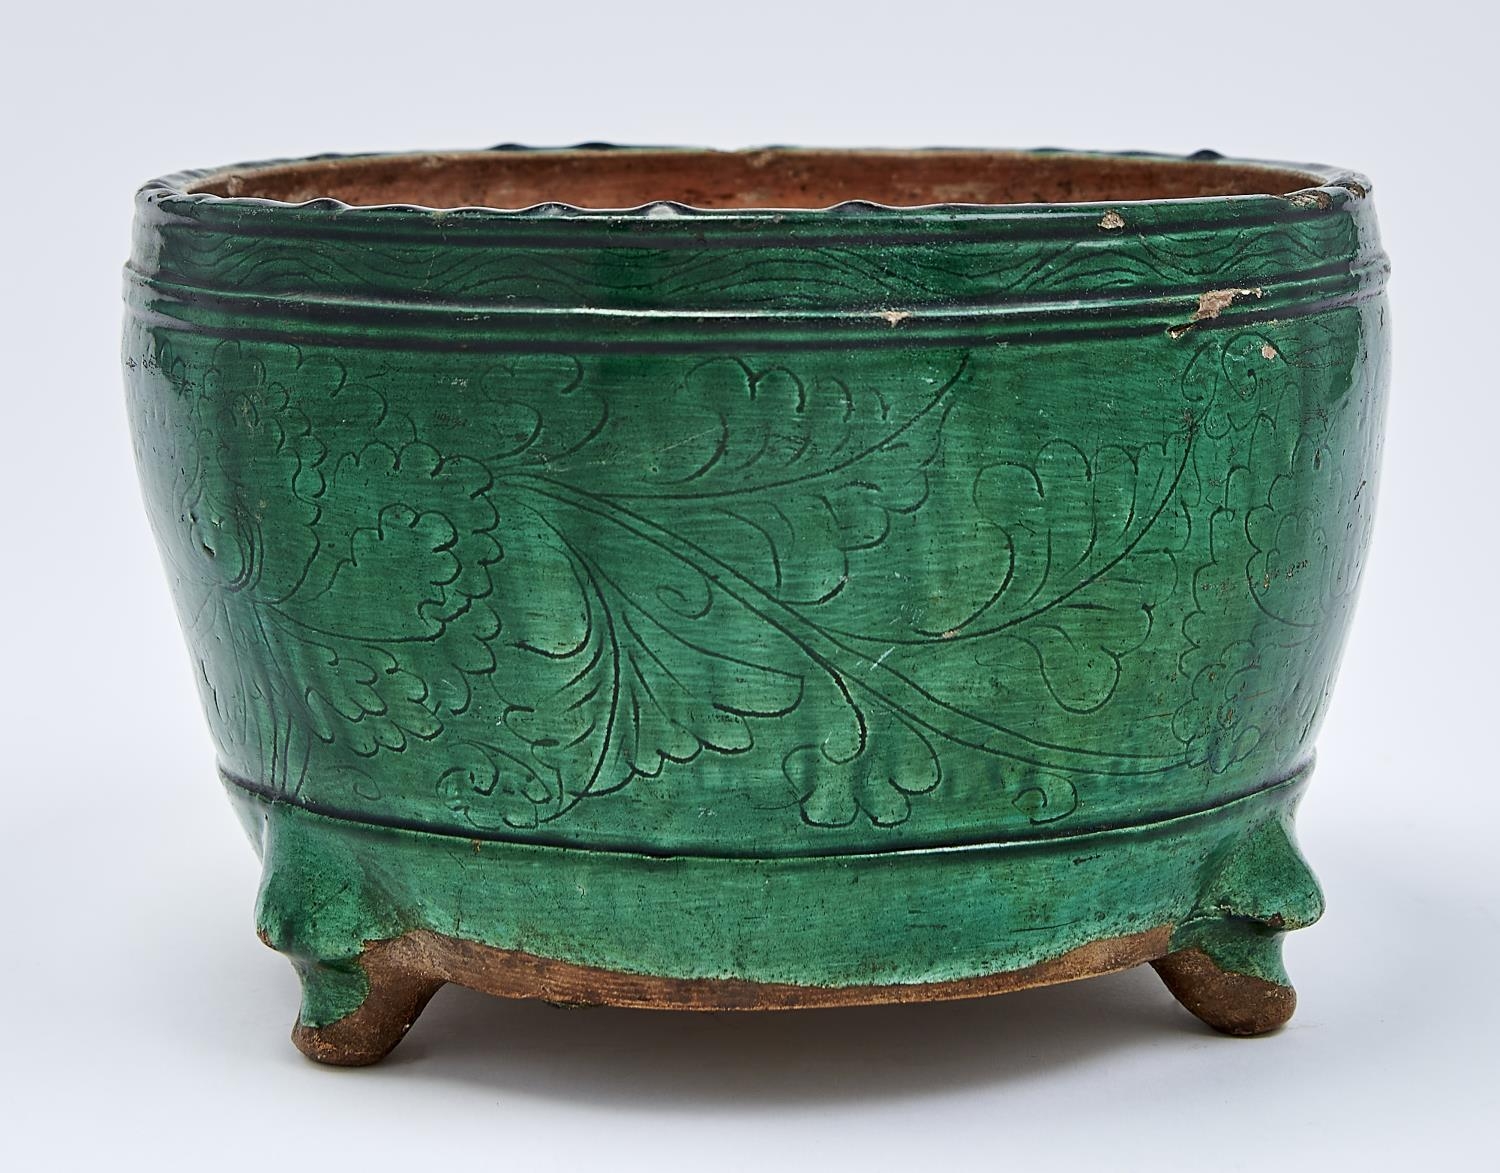 A Chinese green glazed biscuit tripod censer, Ming dynasty, early 17th c, the rounded sides